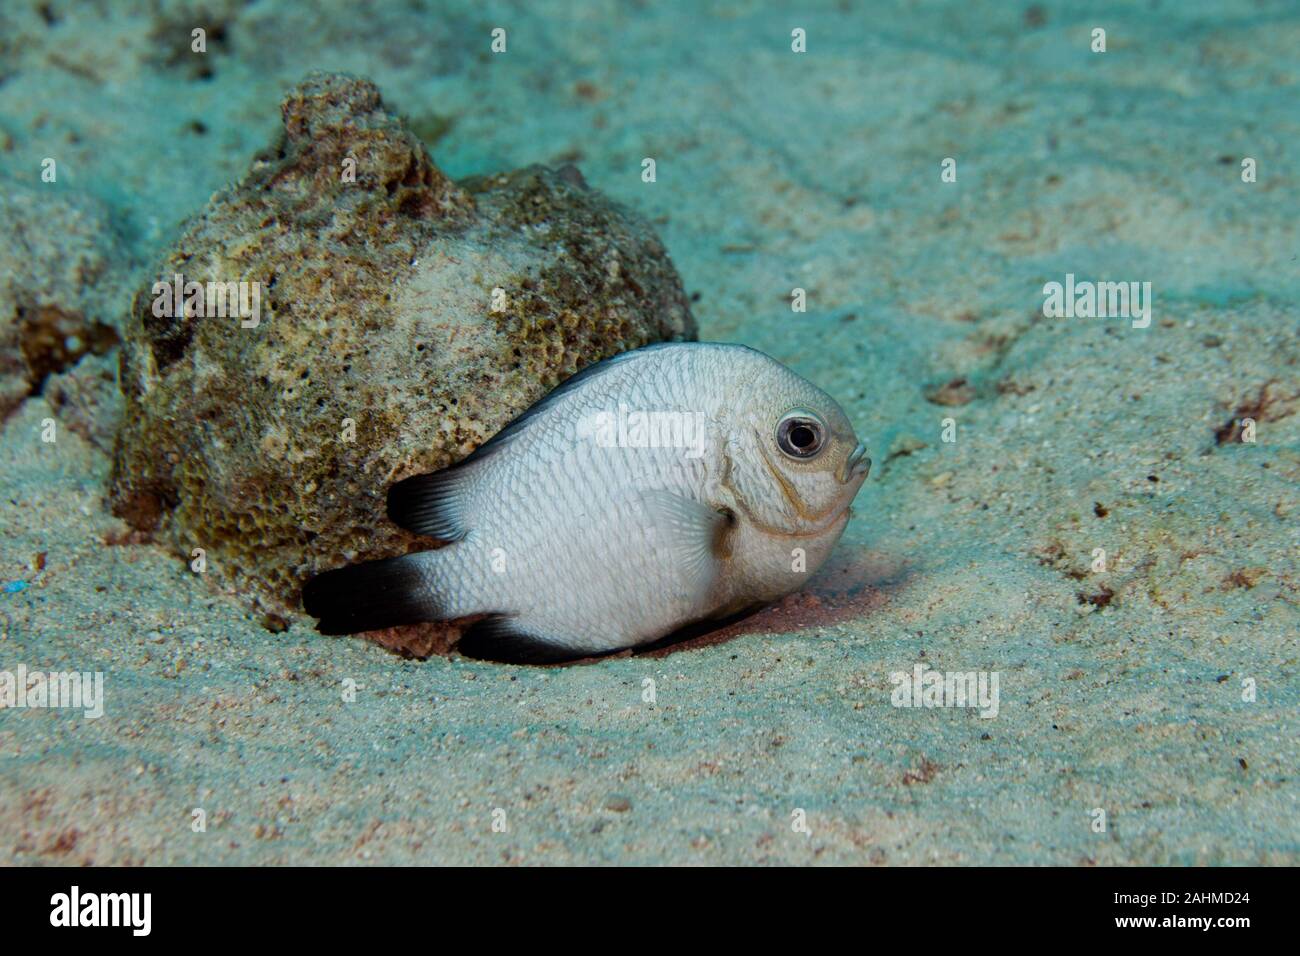 The threespot dascyllus (Dascyllus trimaculatus), also known as the domino  damsel or simply domino, is a species of damselfish from the family Pomacen  Stock Photo - Alamy